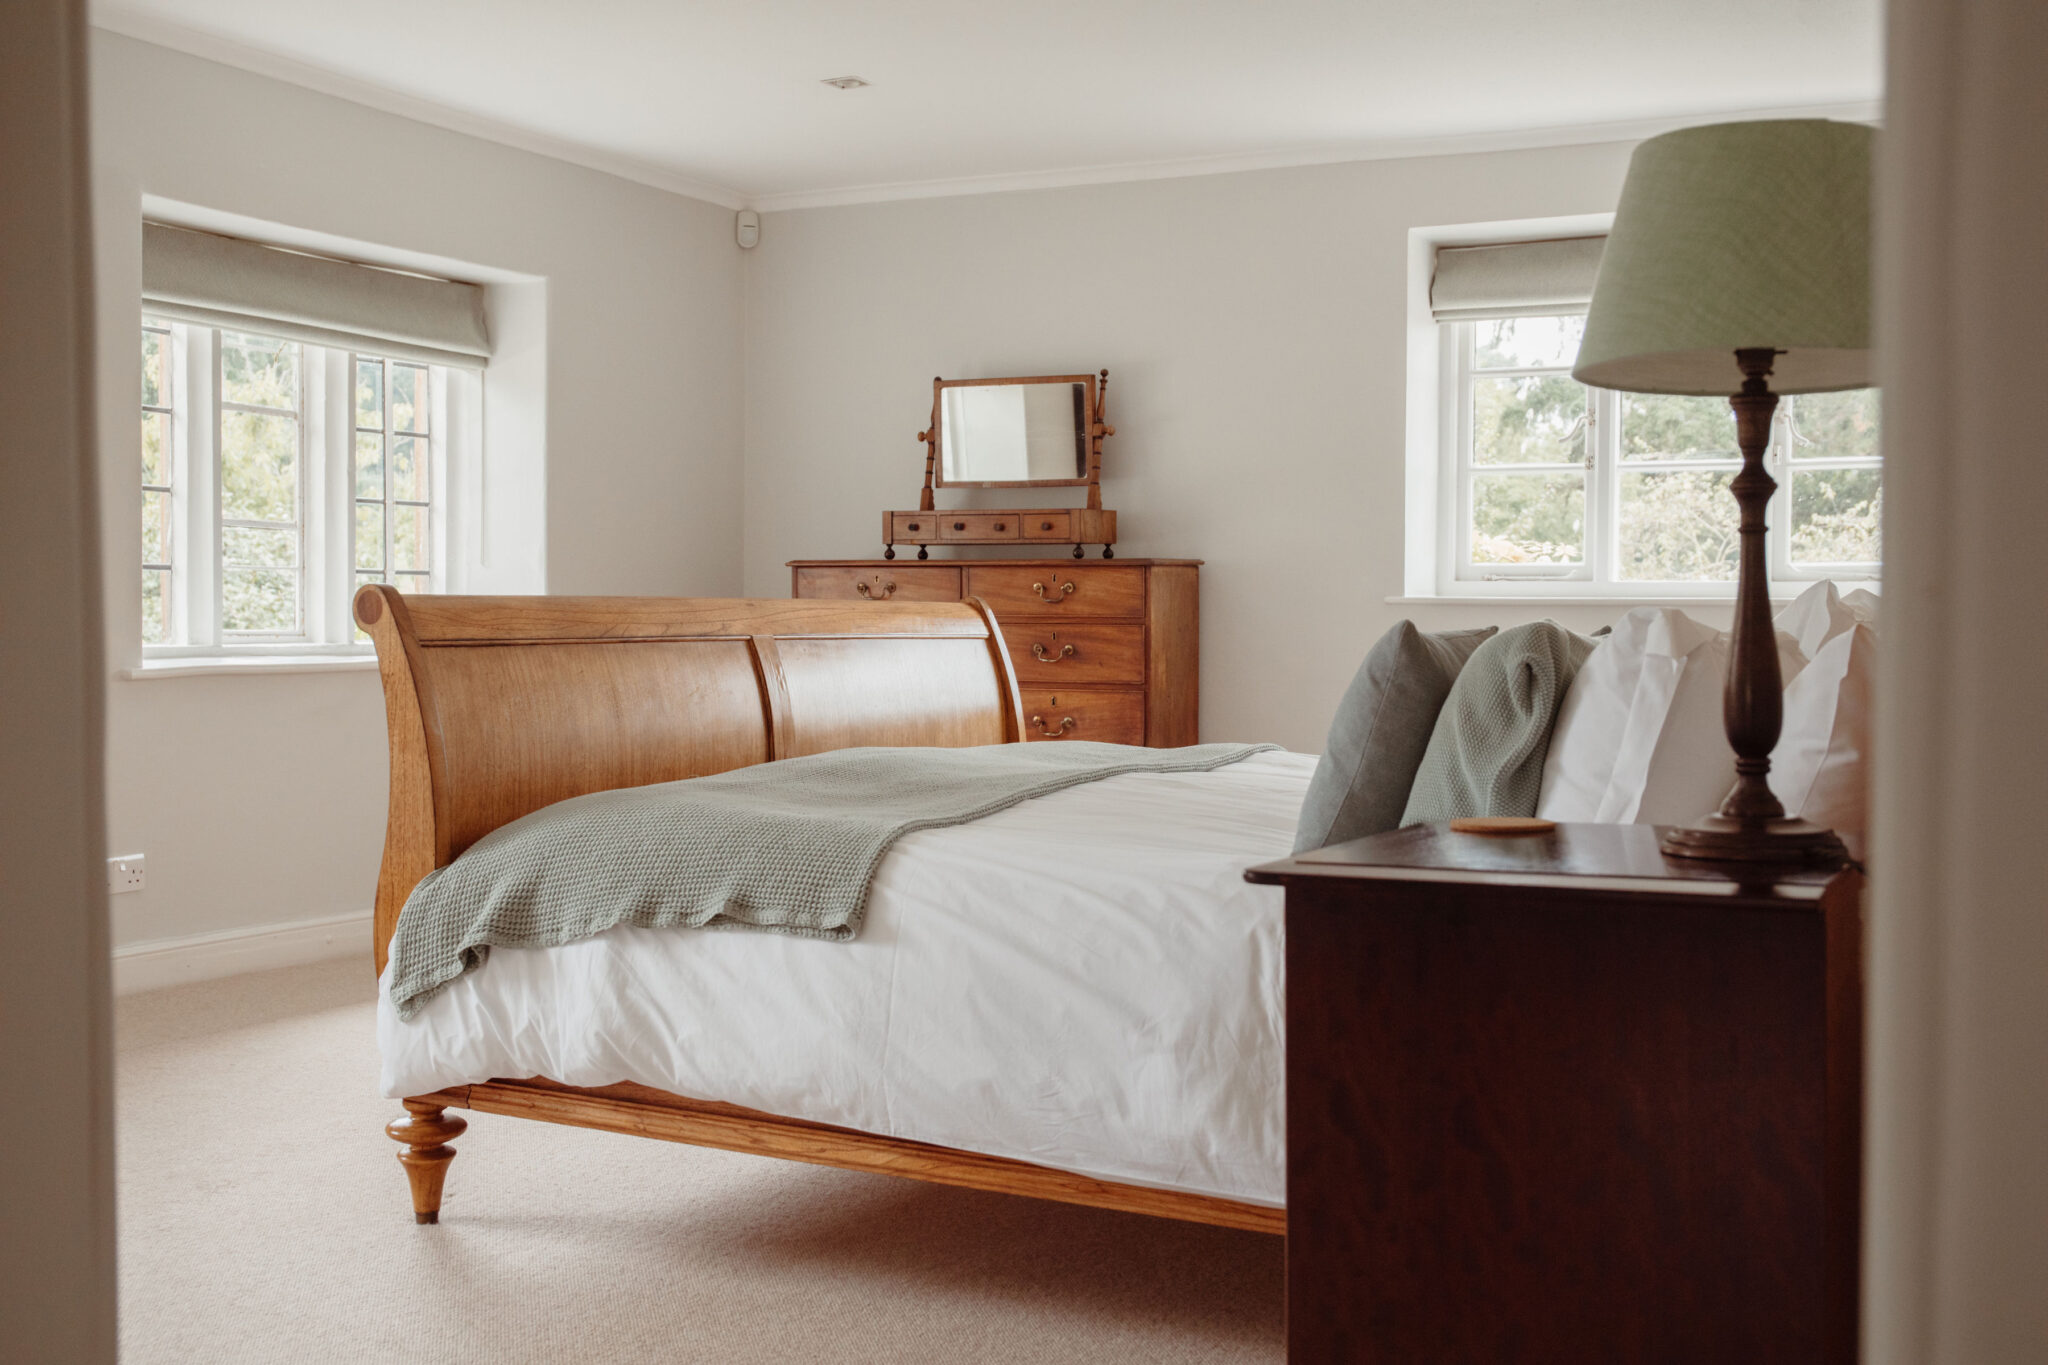 A beautiful curved wooden bed frame